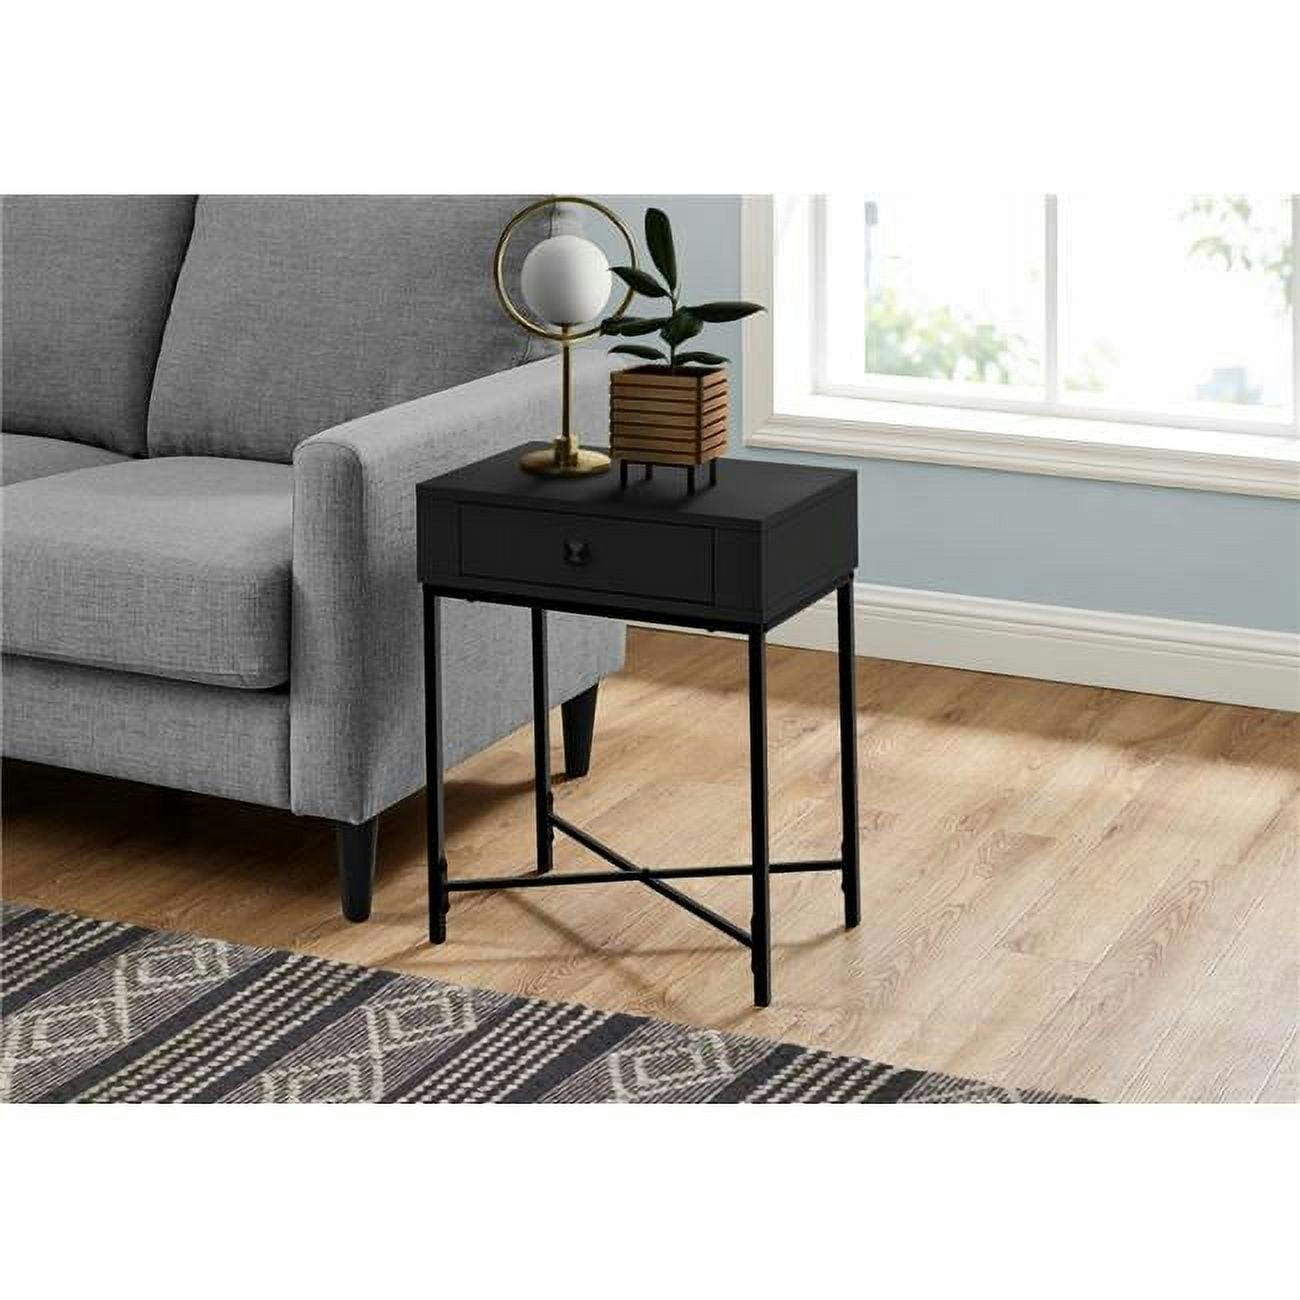 Sleek Black Metal and Wood Rectangular Accent Table with Storage